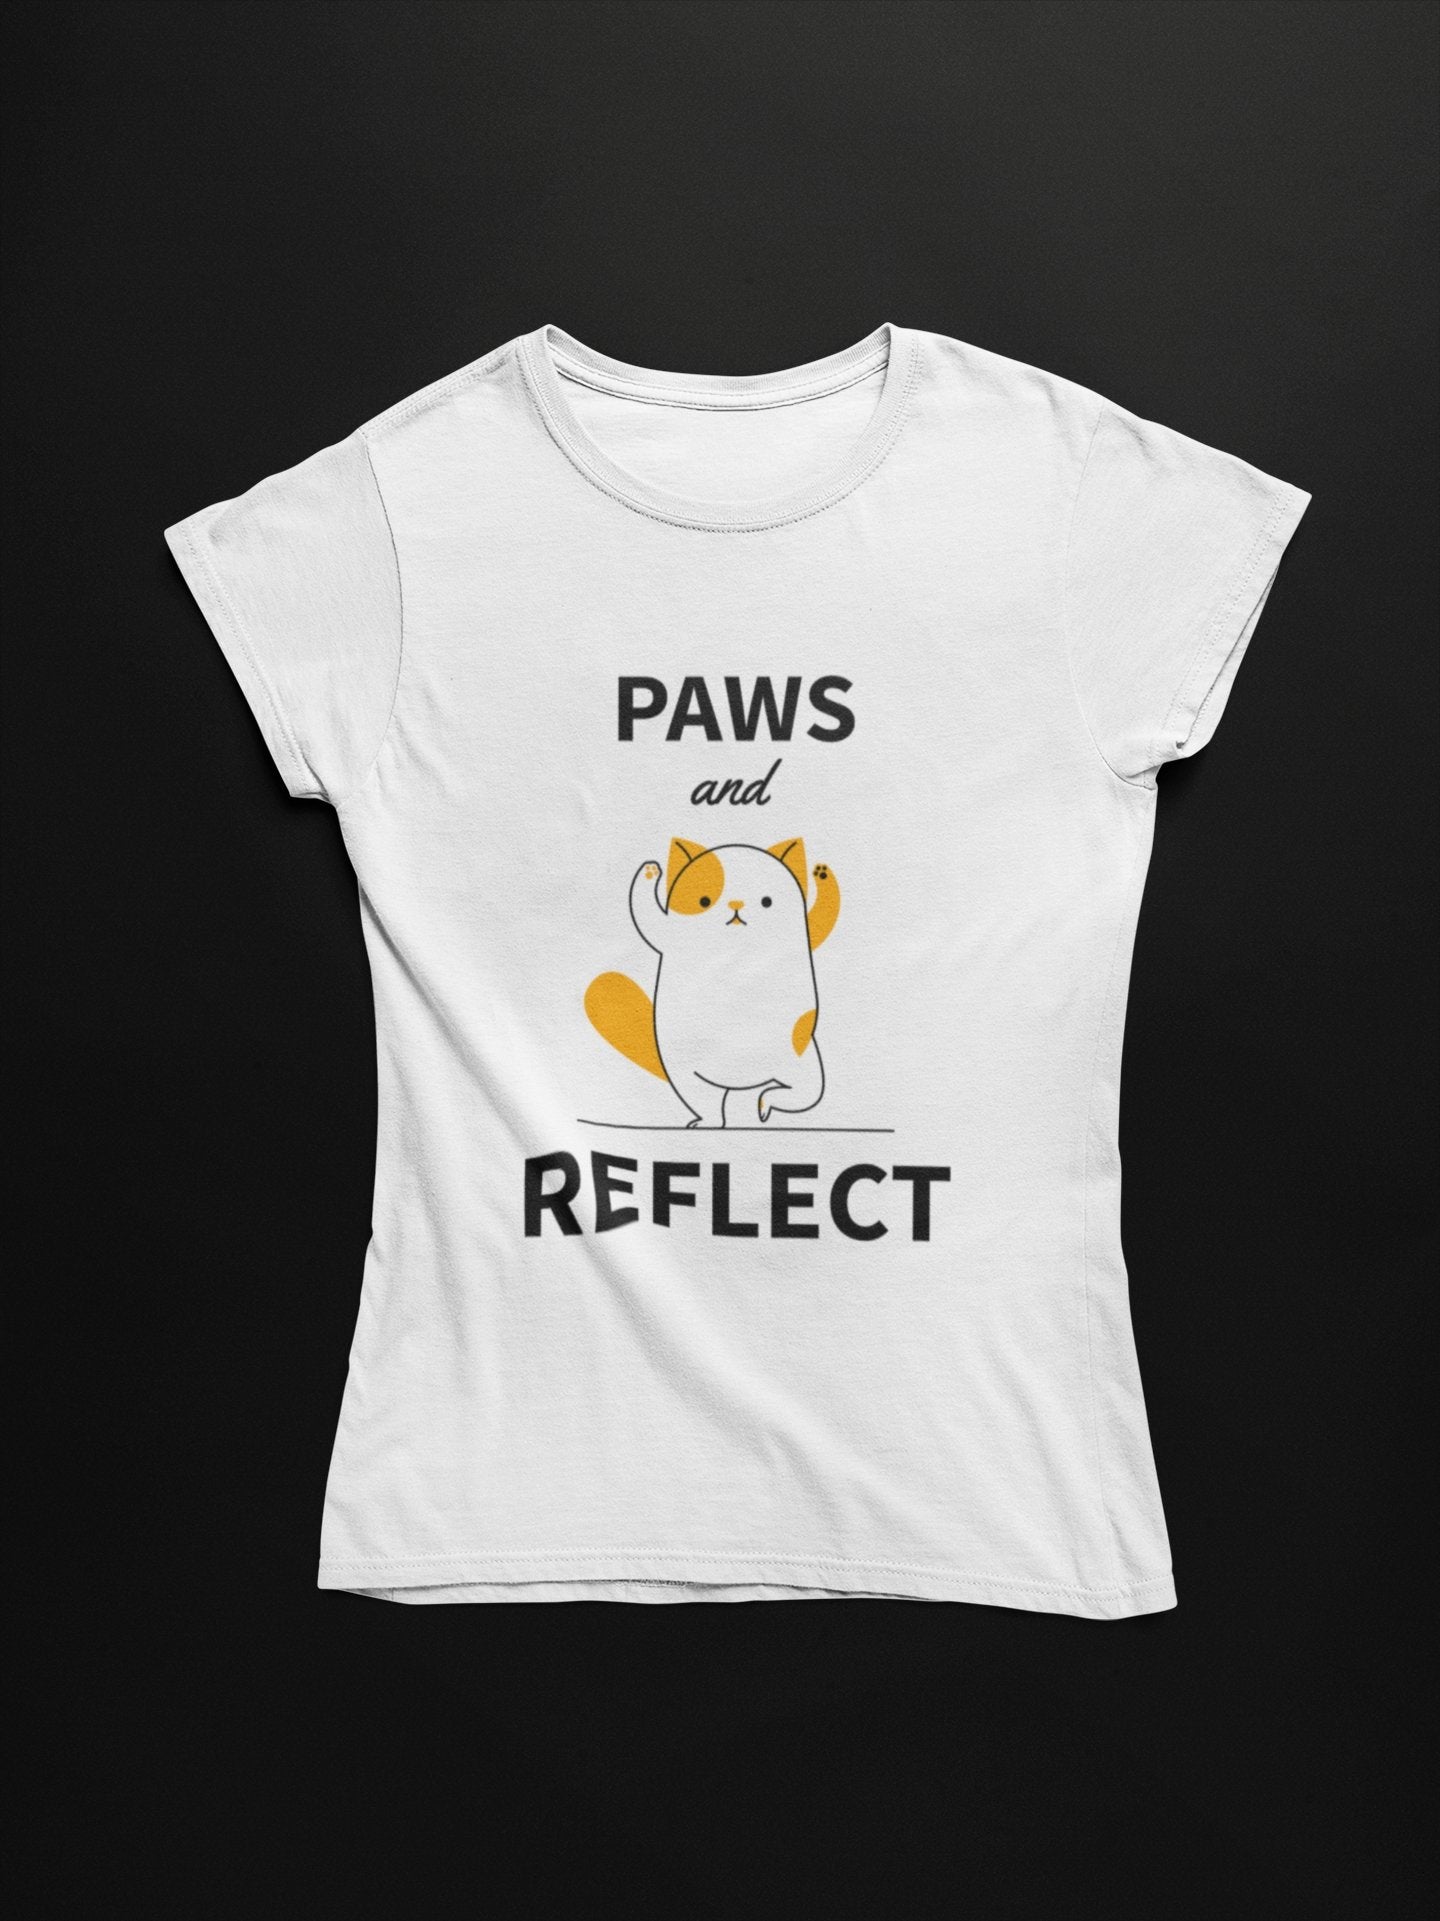 thelegalgang,Paws and Reflect Design Yoga T shirt for Women,WOMEN.